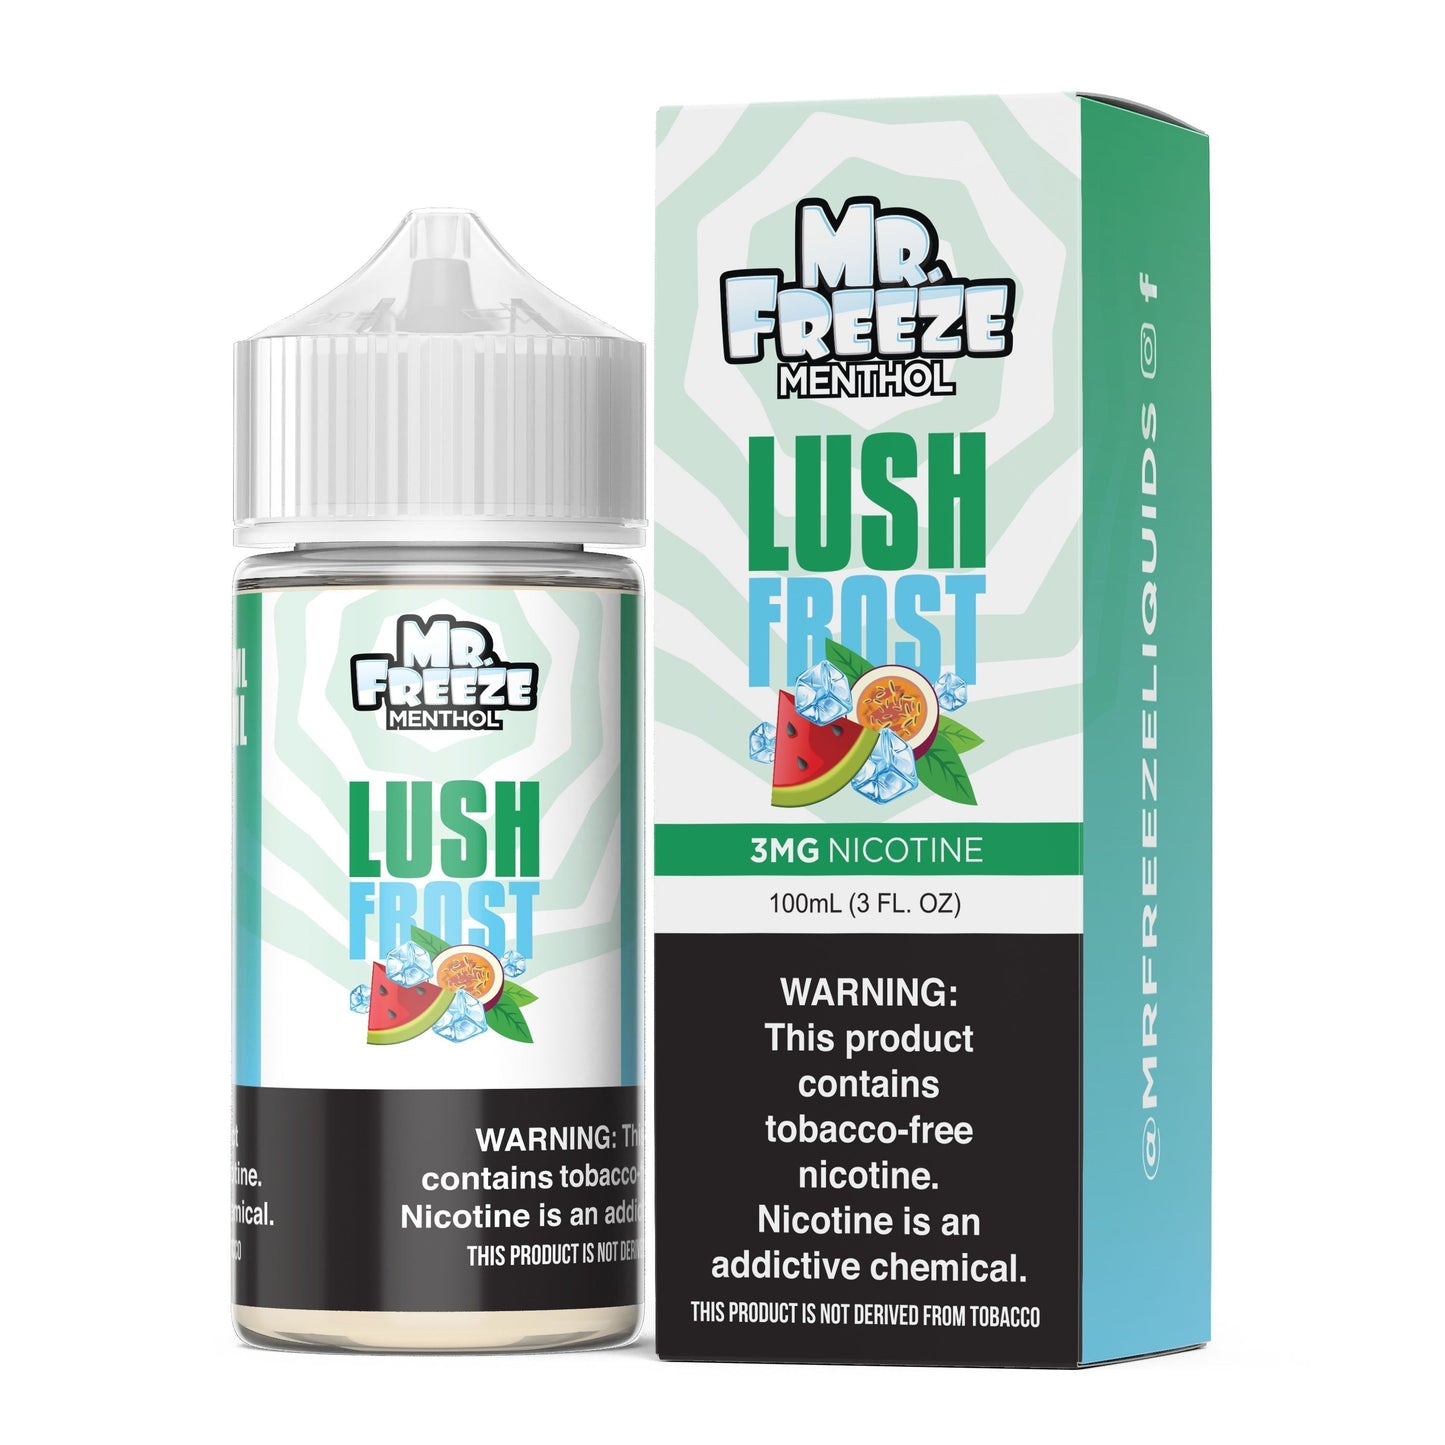 Mr. Freeze Tobacco-Free Nicotine Series | 100mL - Lush Frost with packaging